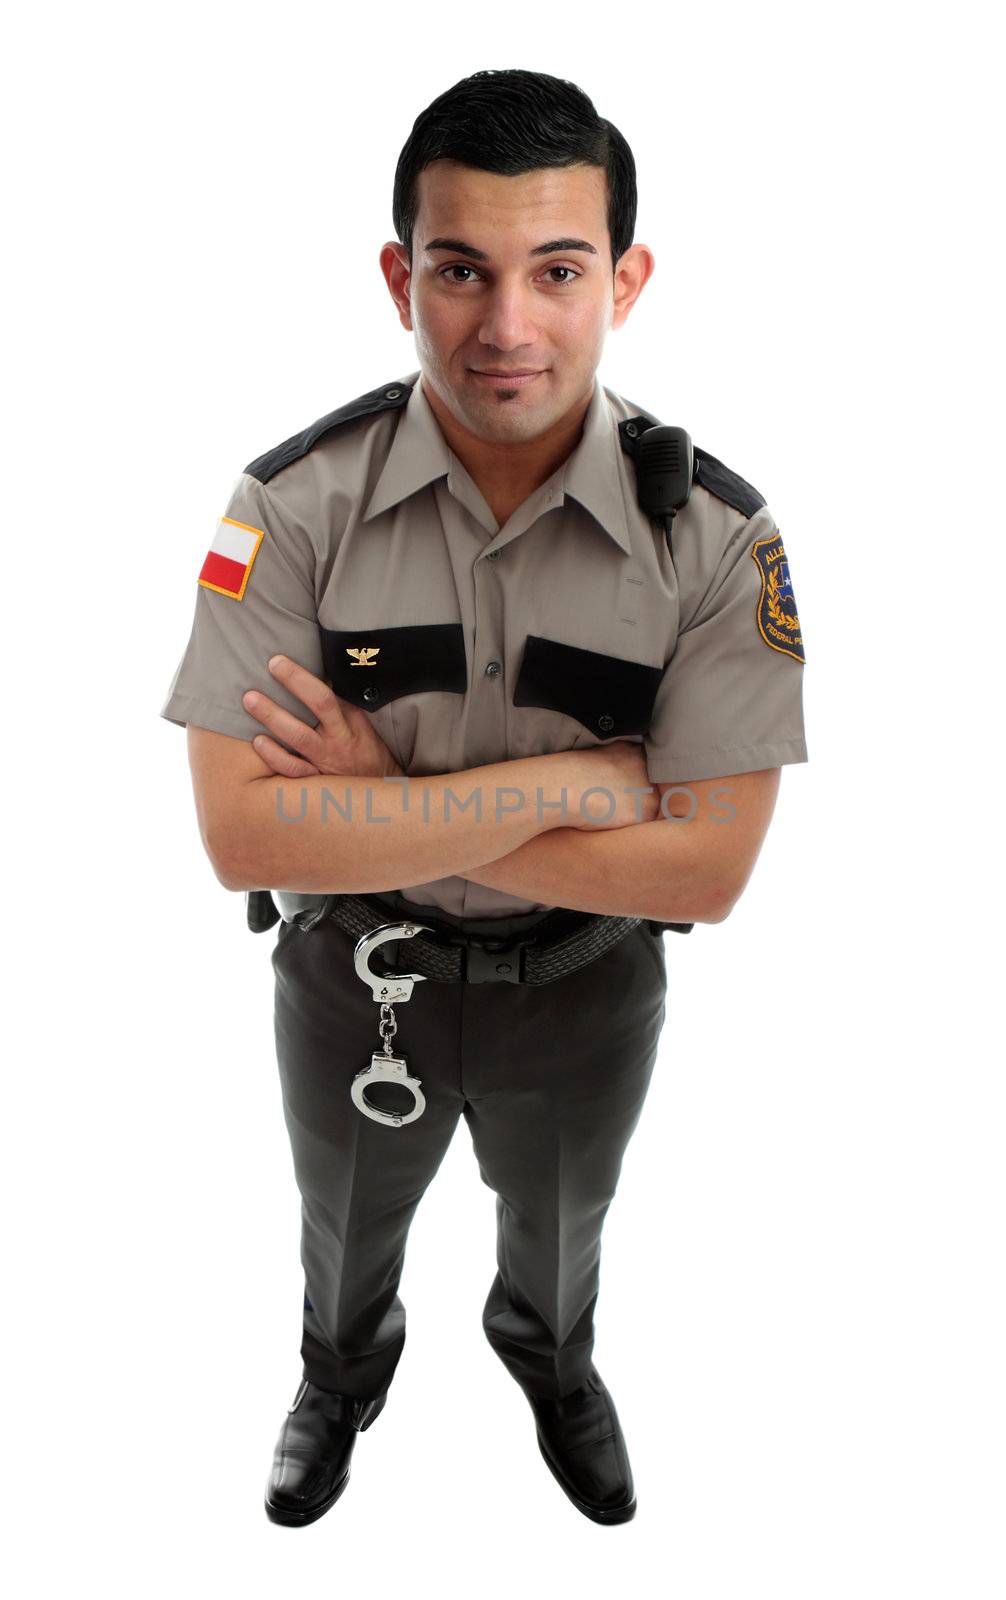 A male prison guard warden or policeman in uniform with duty belt and radio unit.   Standing with arms crossed and looking up.  White background